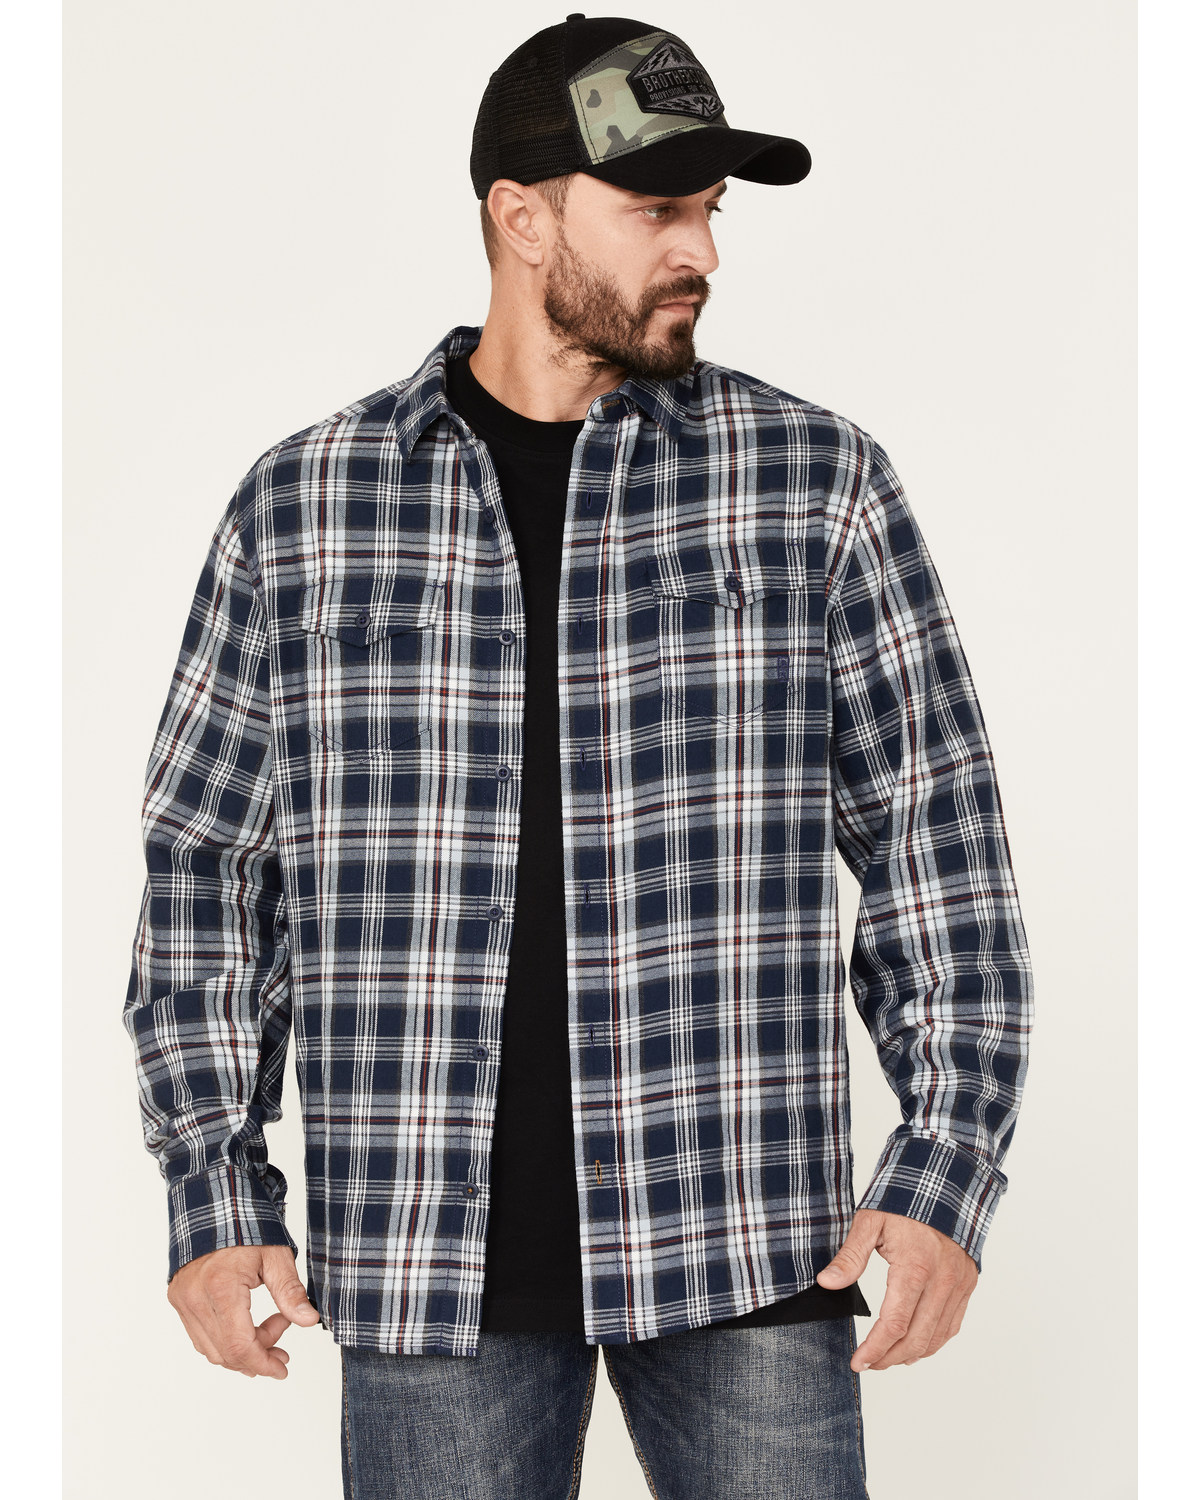 Brothers and Sons Men's Plaid Long Sleeve Button-Down Western Flannel Shirt